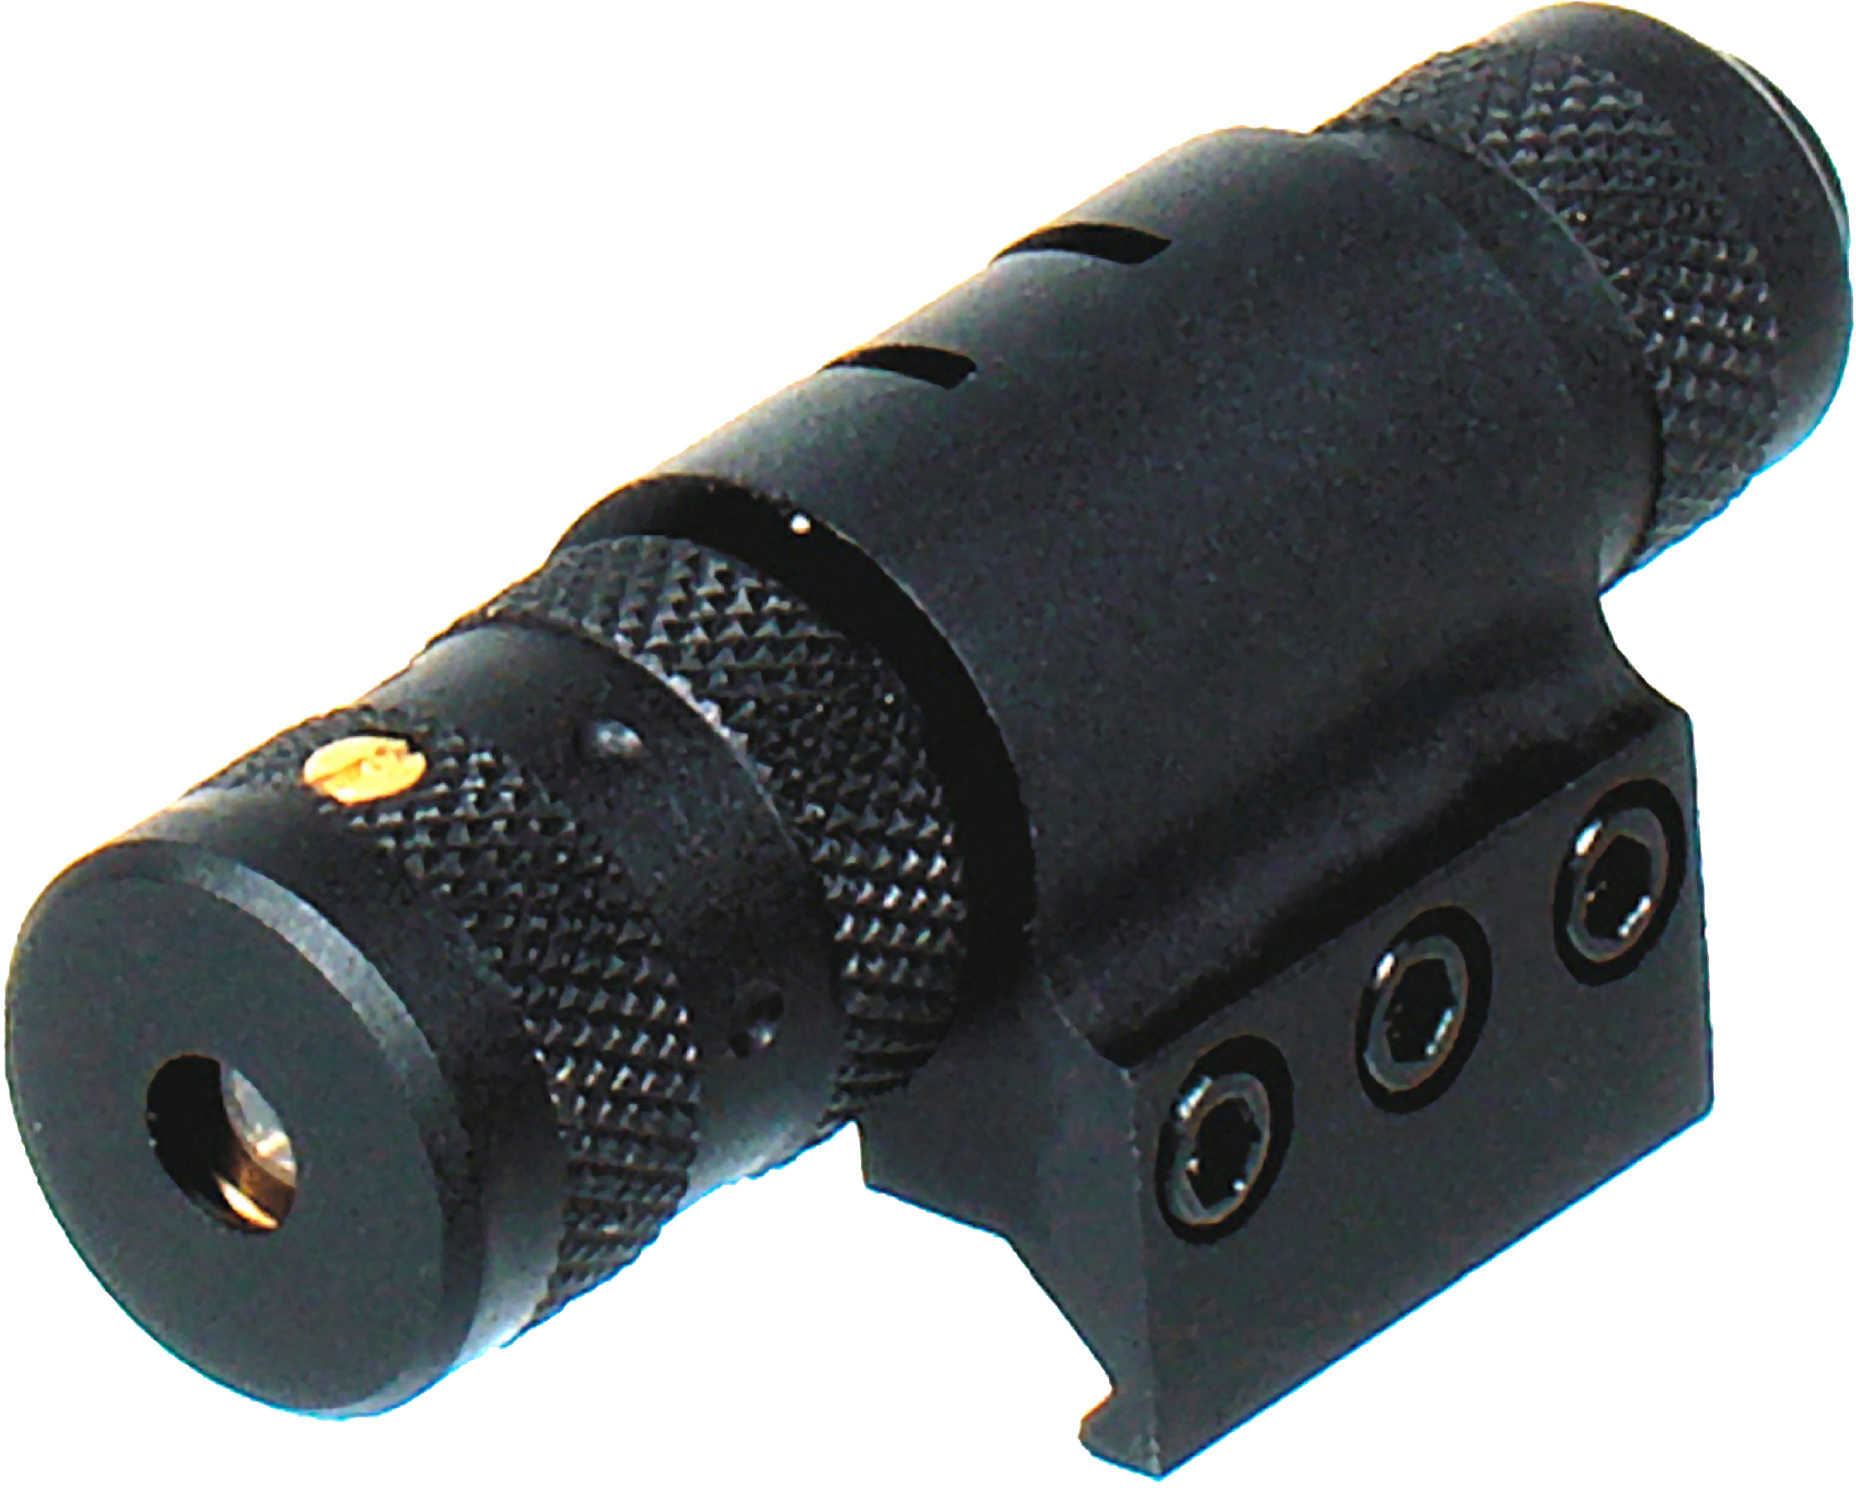 Leapers UTG Combat Tactical W/E Adjustable Red Laser with Rings Md: SCPLS268